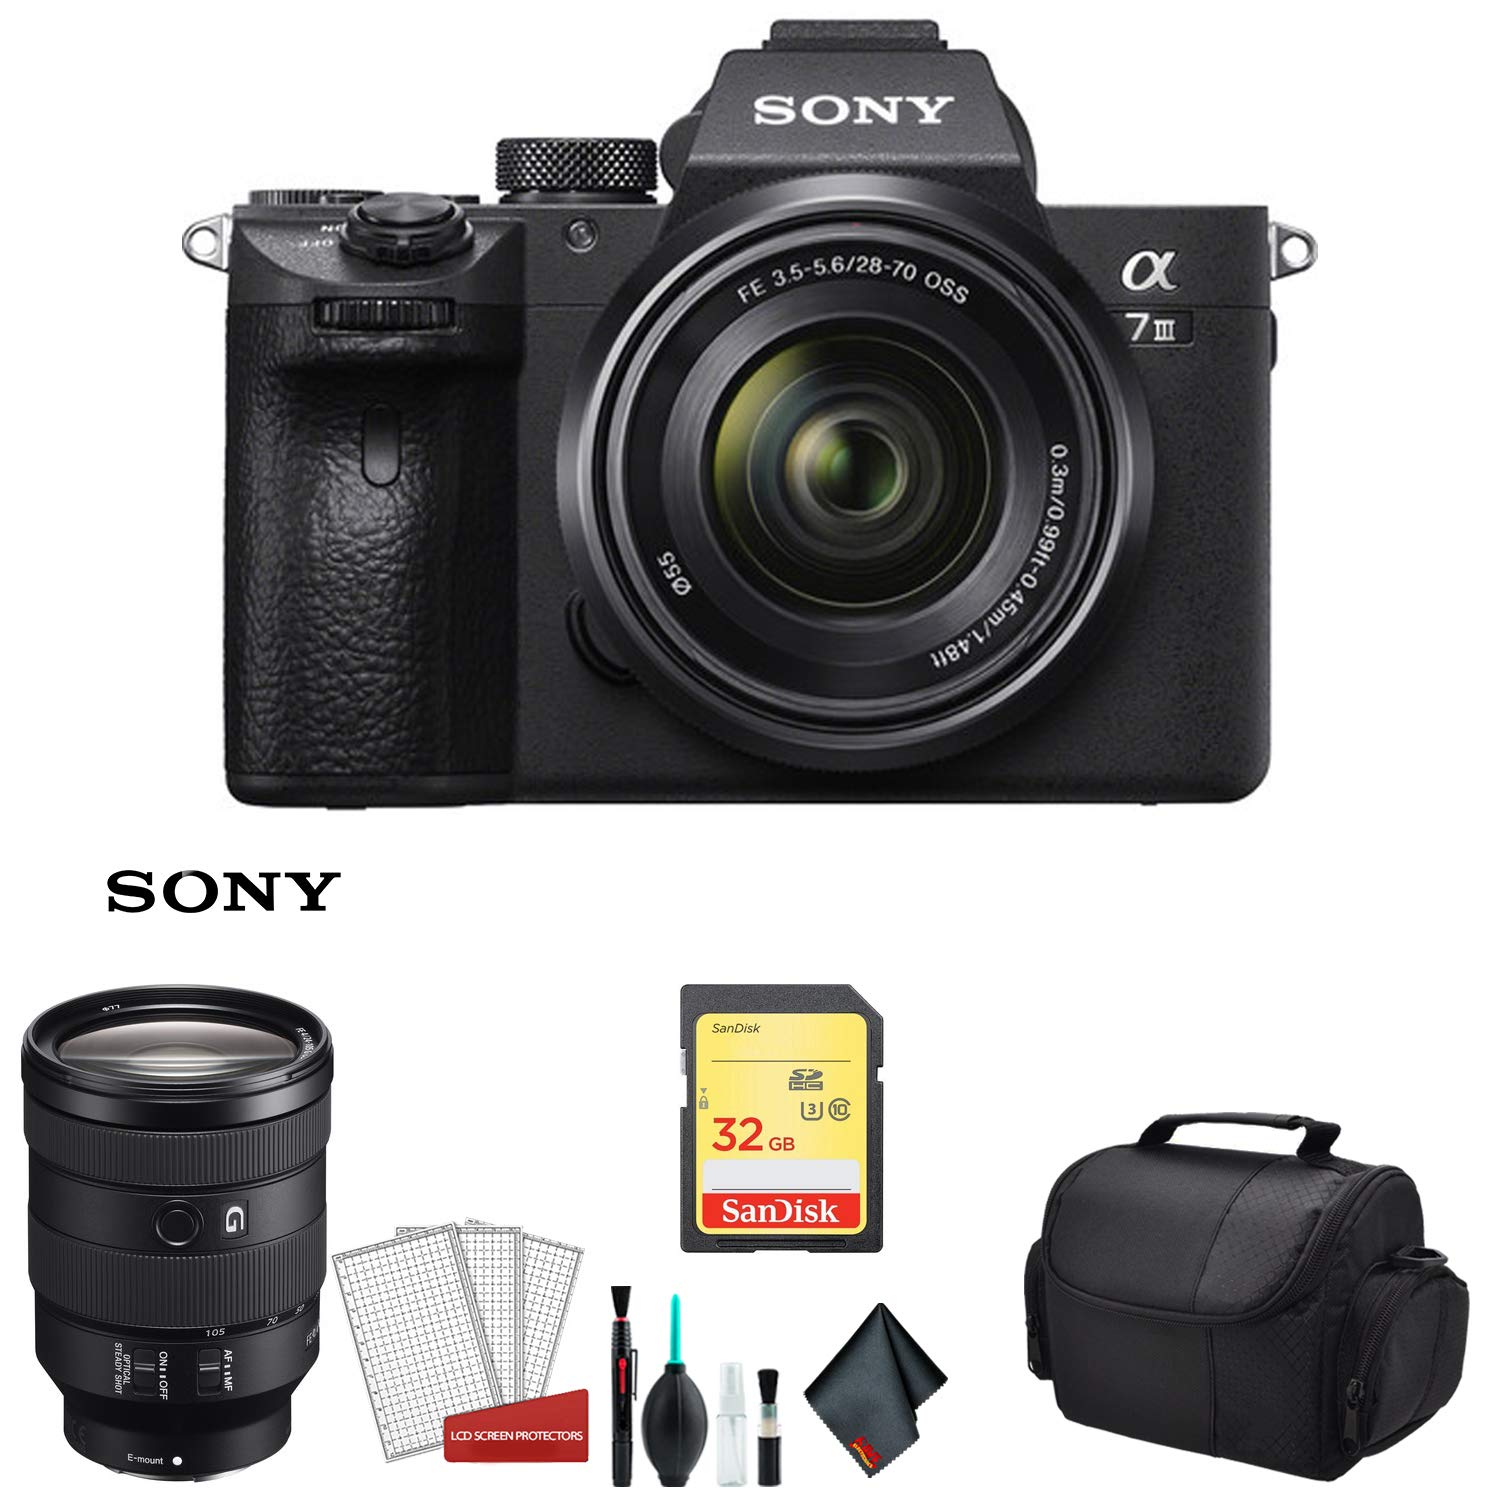 Sony Alpha a7 III Full Frame Mirrorless Digital Camera with 28-70mm Lens ILCE7M3K/B - Bundle Kit with Sony FE 24-105mm f